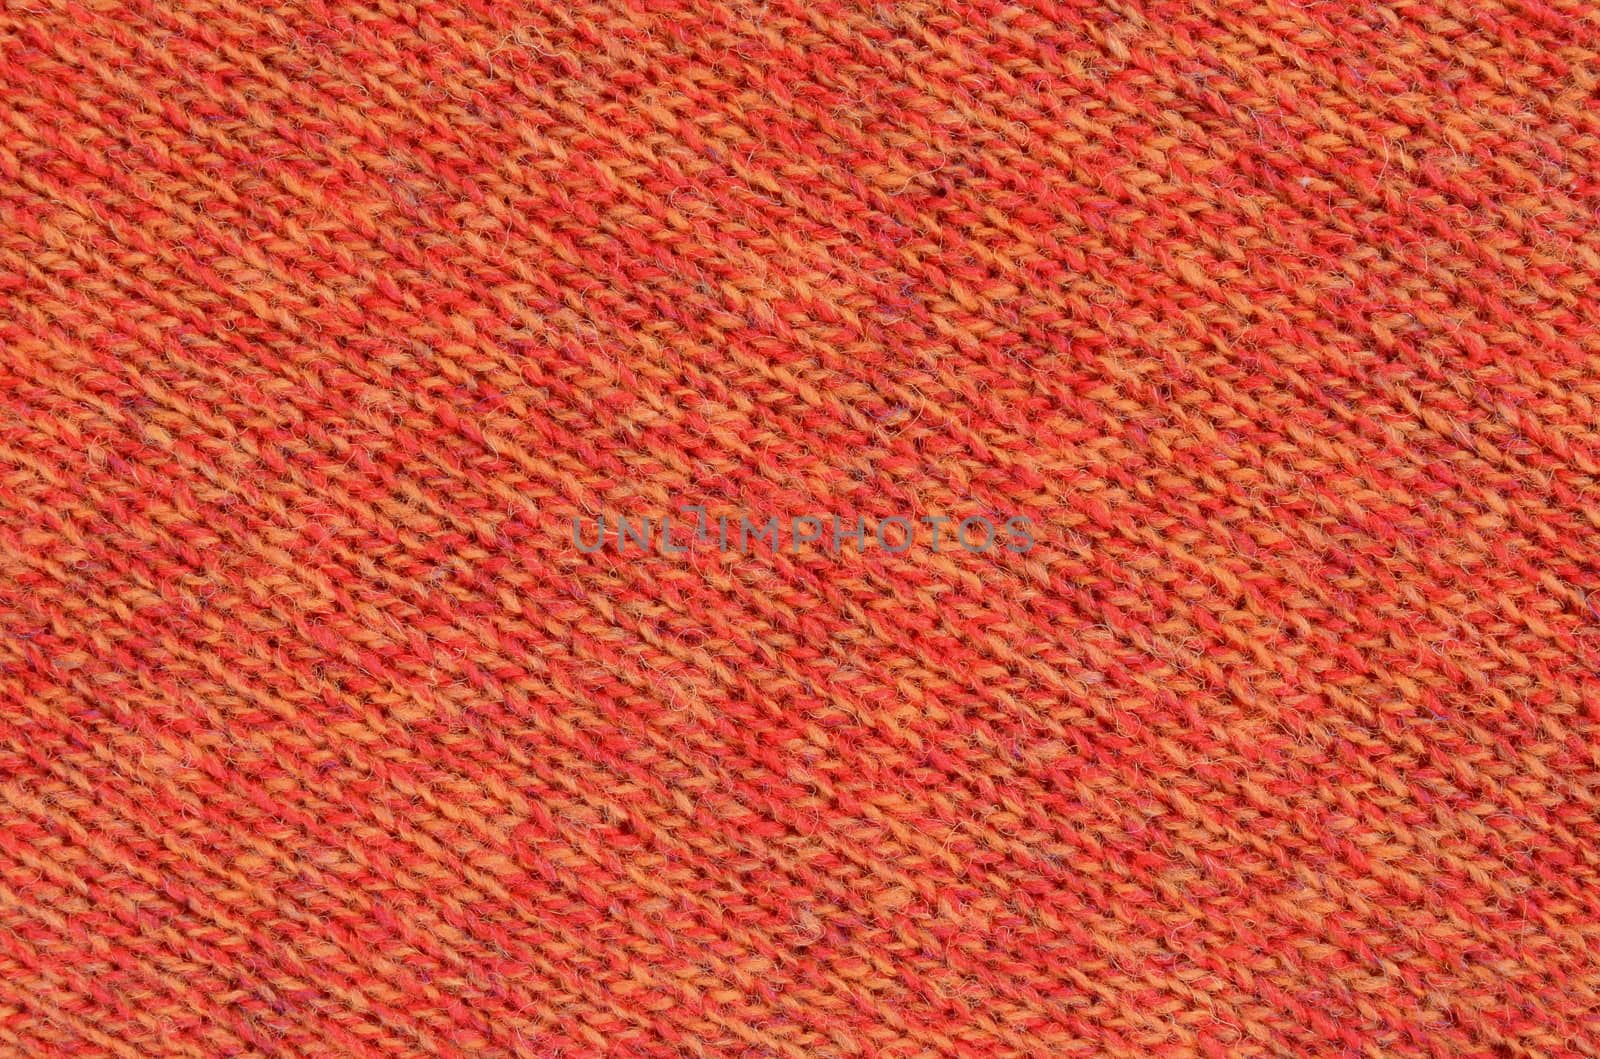 Abstract Background Texture Of Knitted Orange Wool Fabric